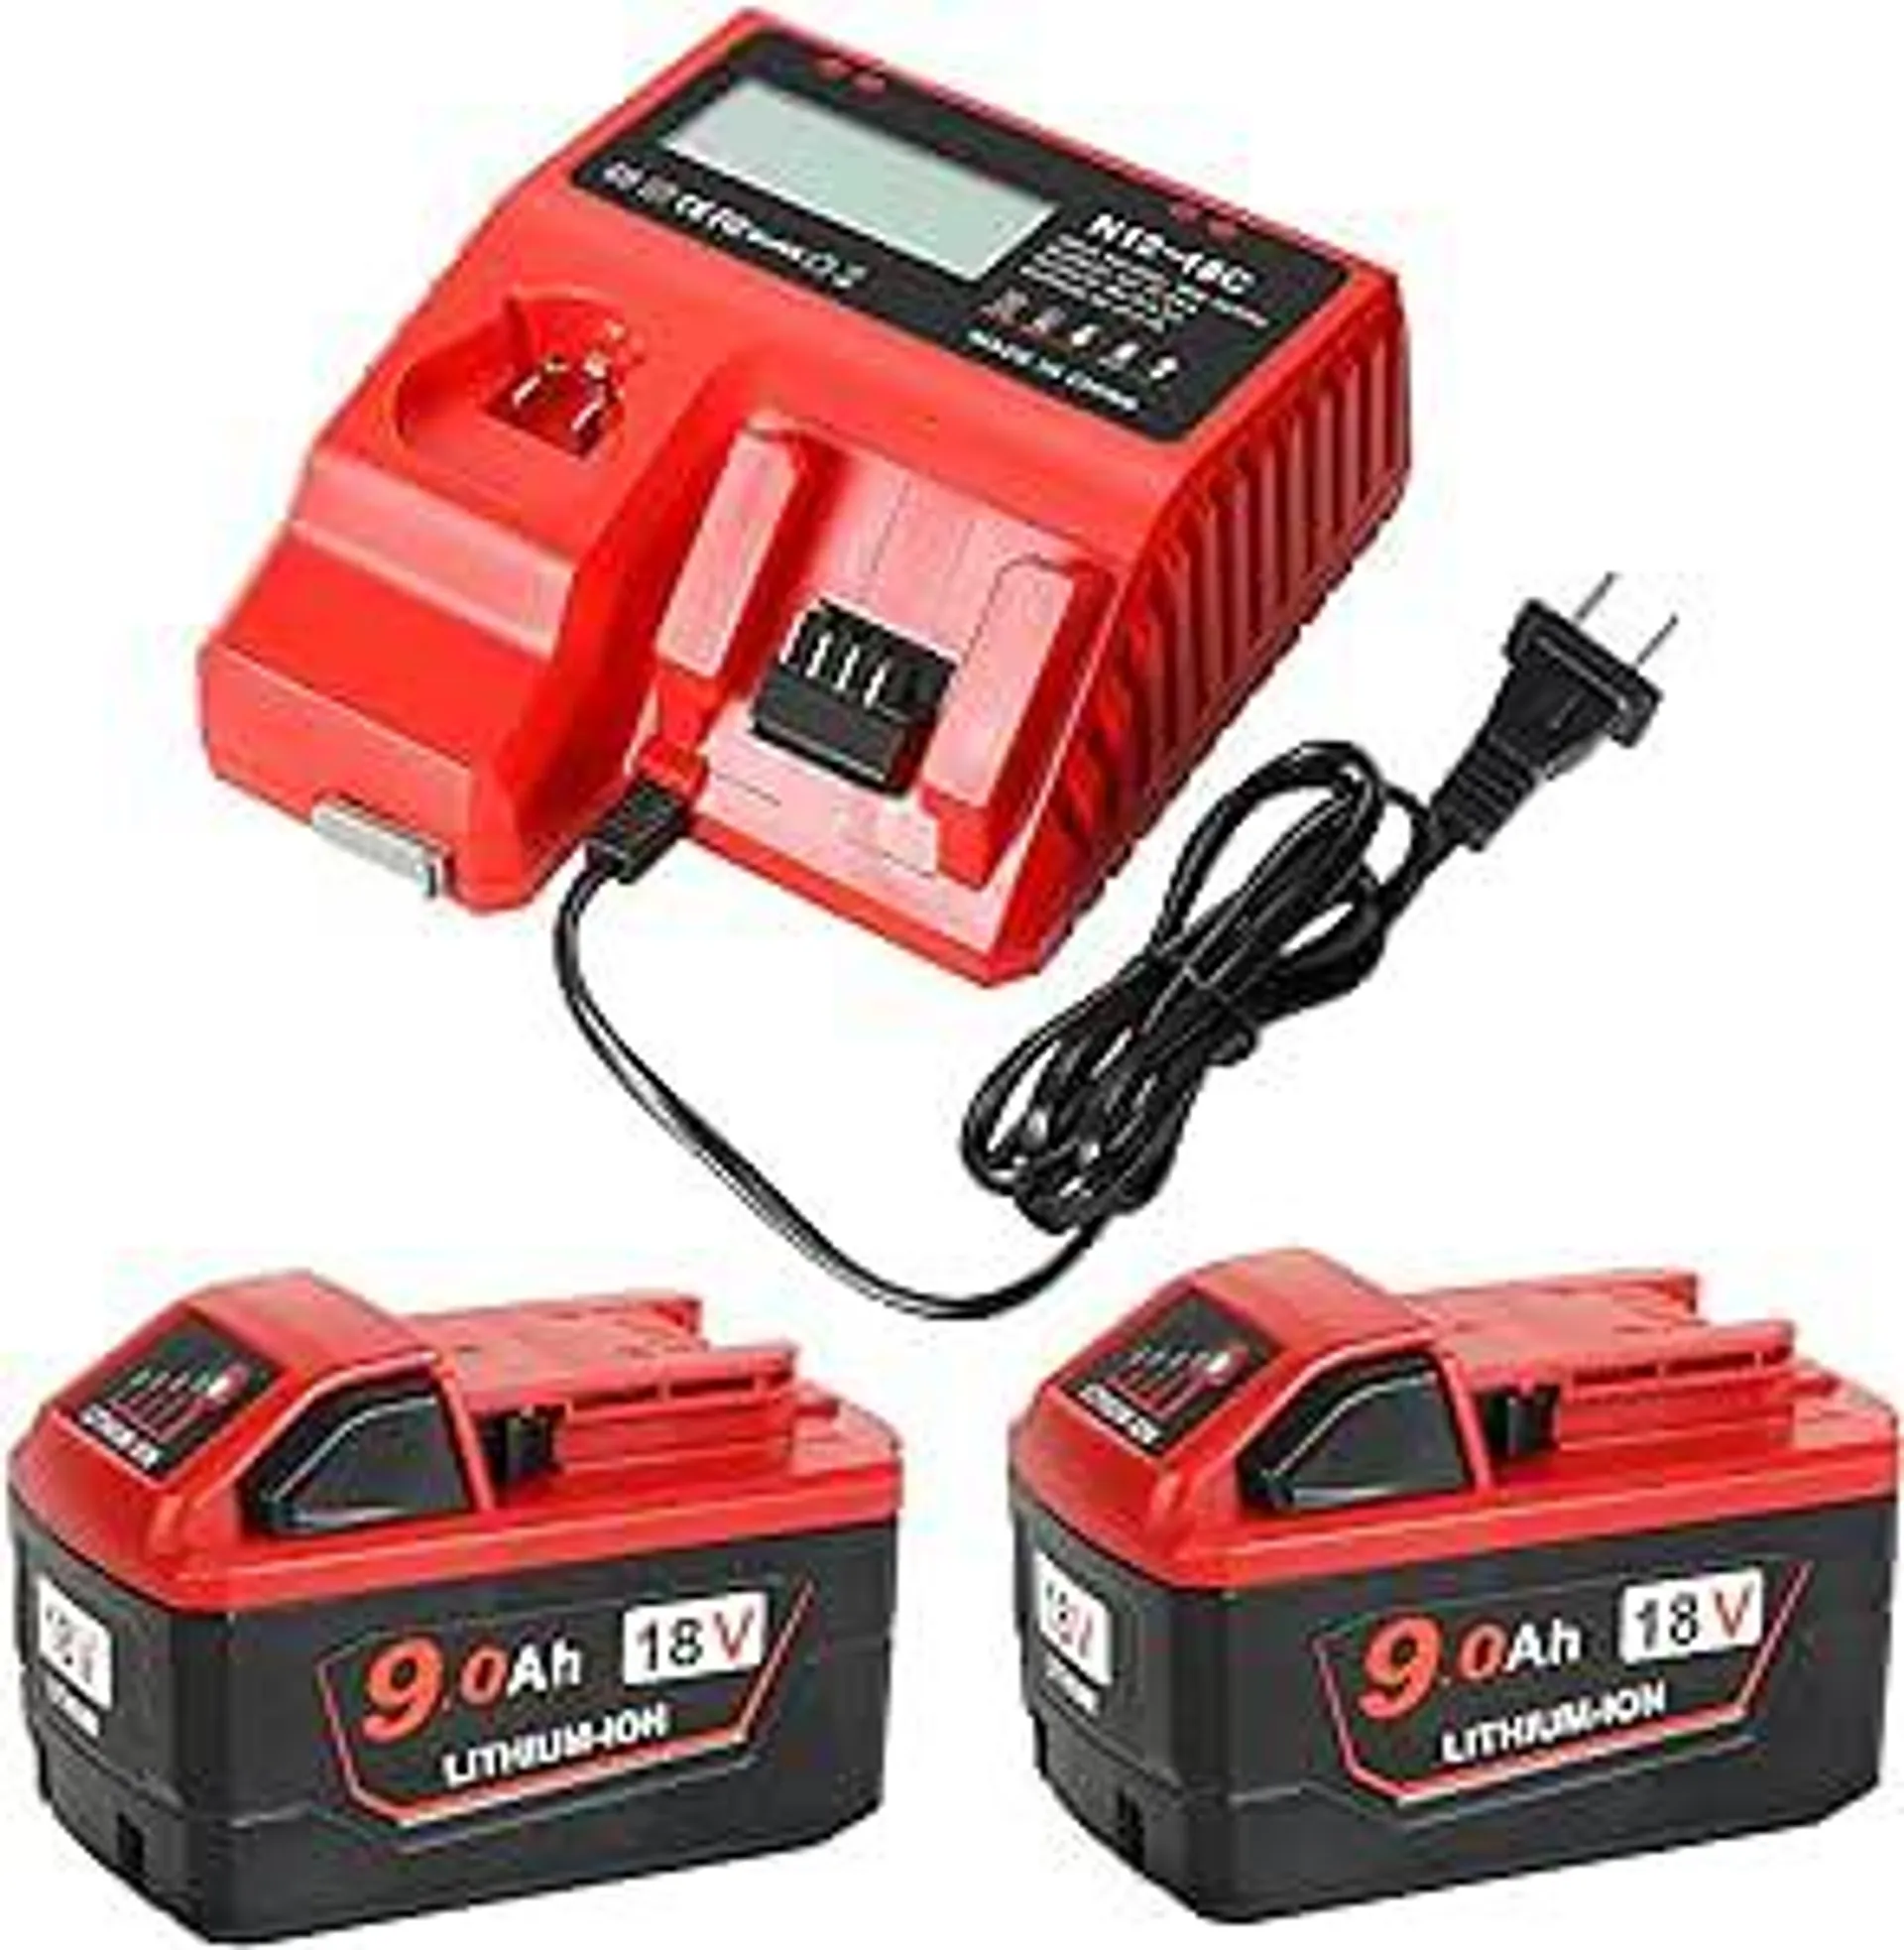 New Version 18V 9.0 Ah Battery and Charger Combo Kit Replace for Milwaukee m18V Lithium Ion Batteries 48-11-1862/1852/1840/1830(2)+ 18V Battery Charger 48-59-1812